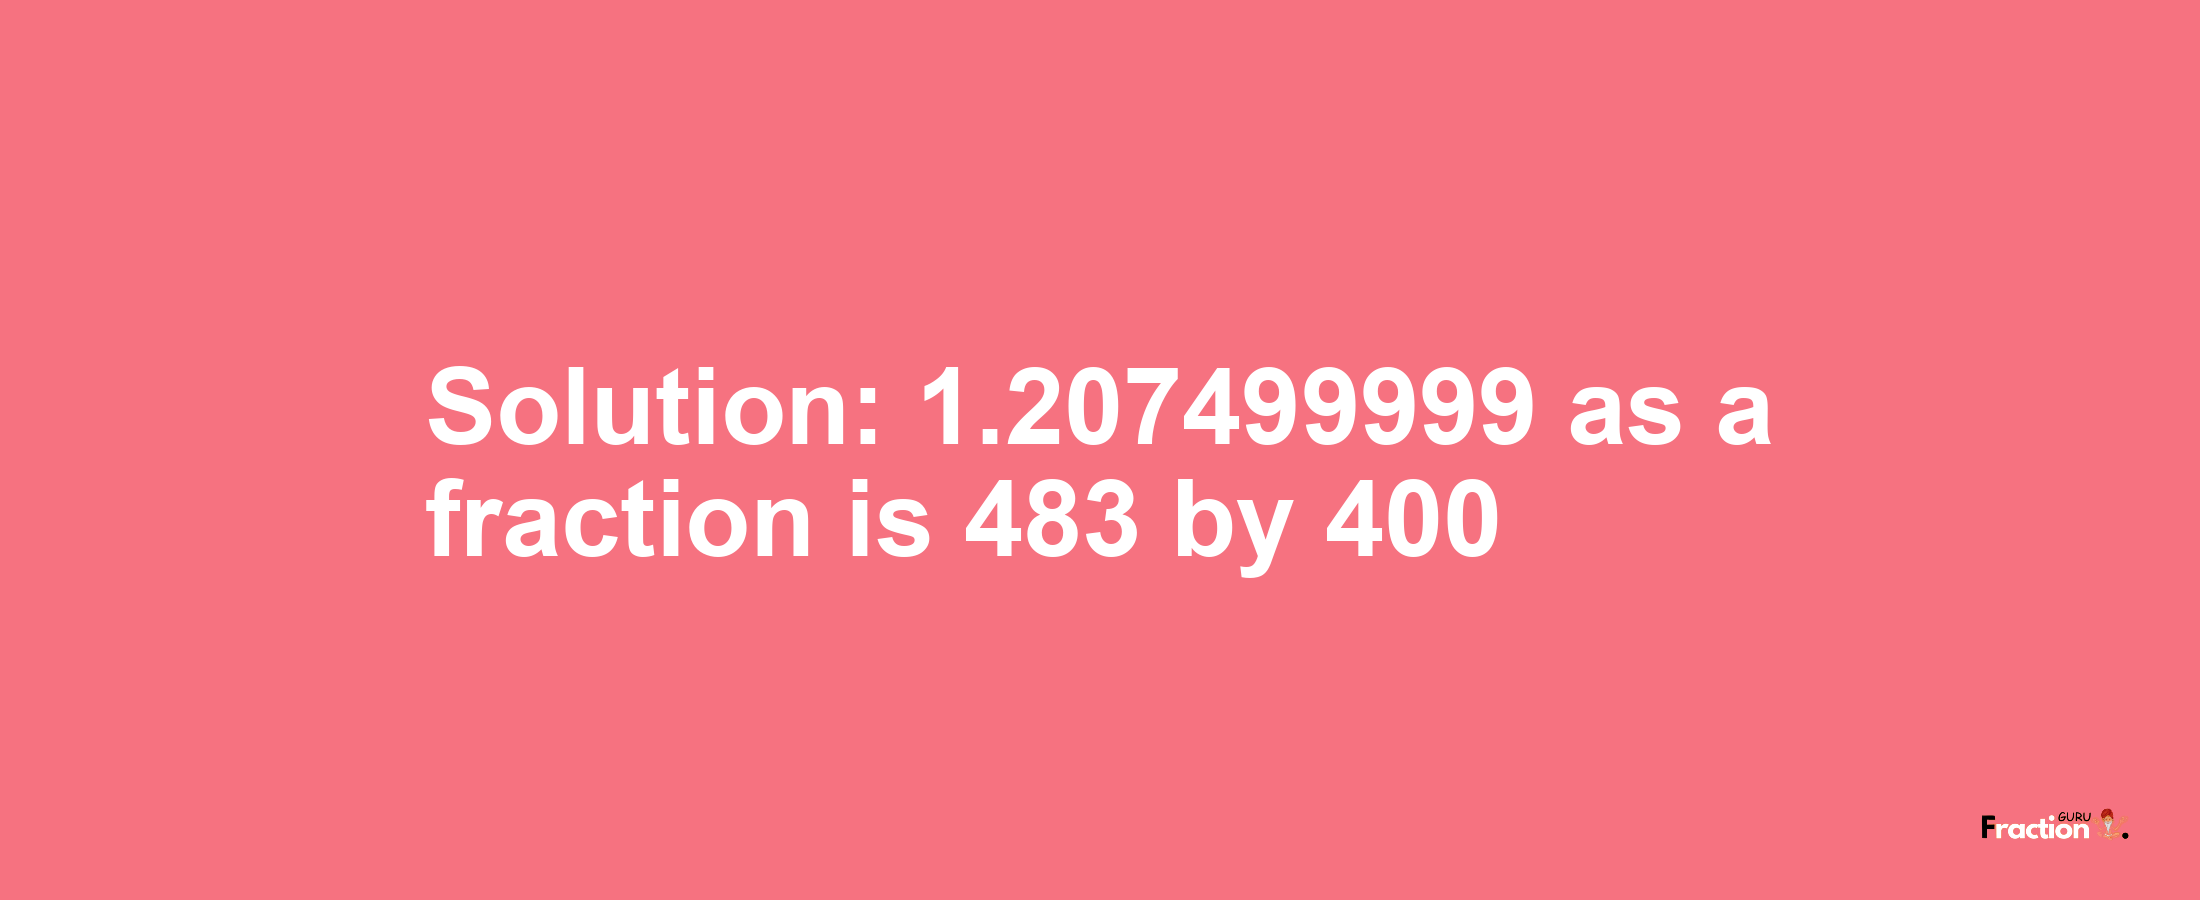 Solution:1.207499999 as a fraction is 483/400